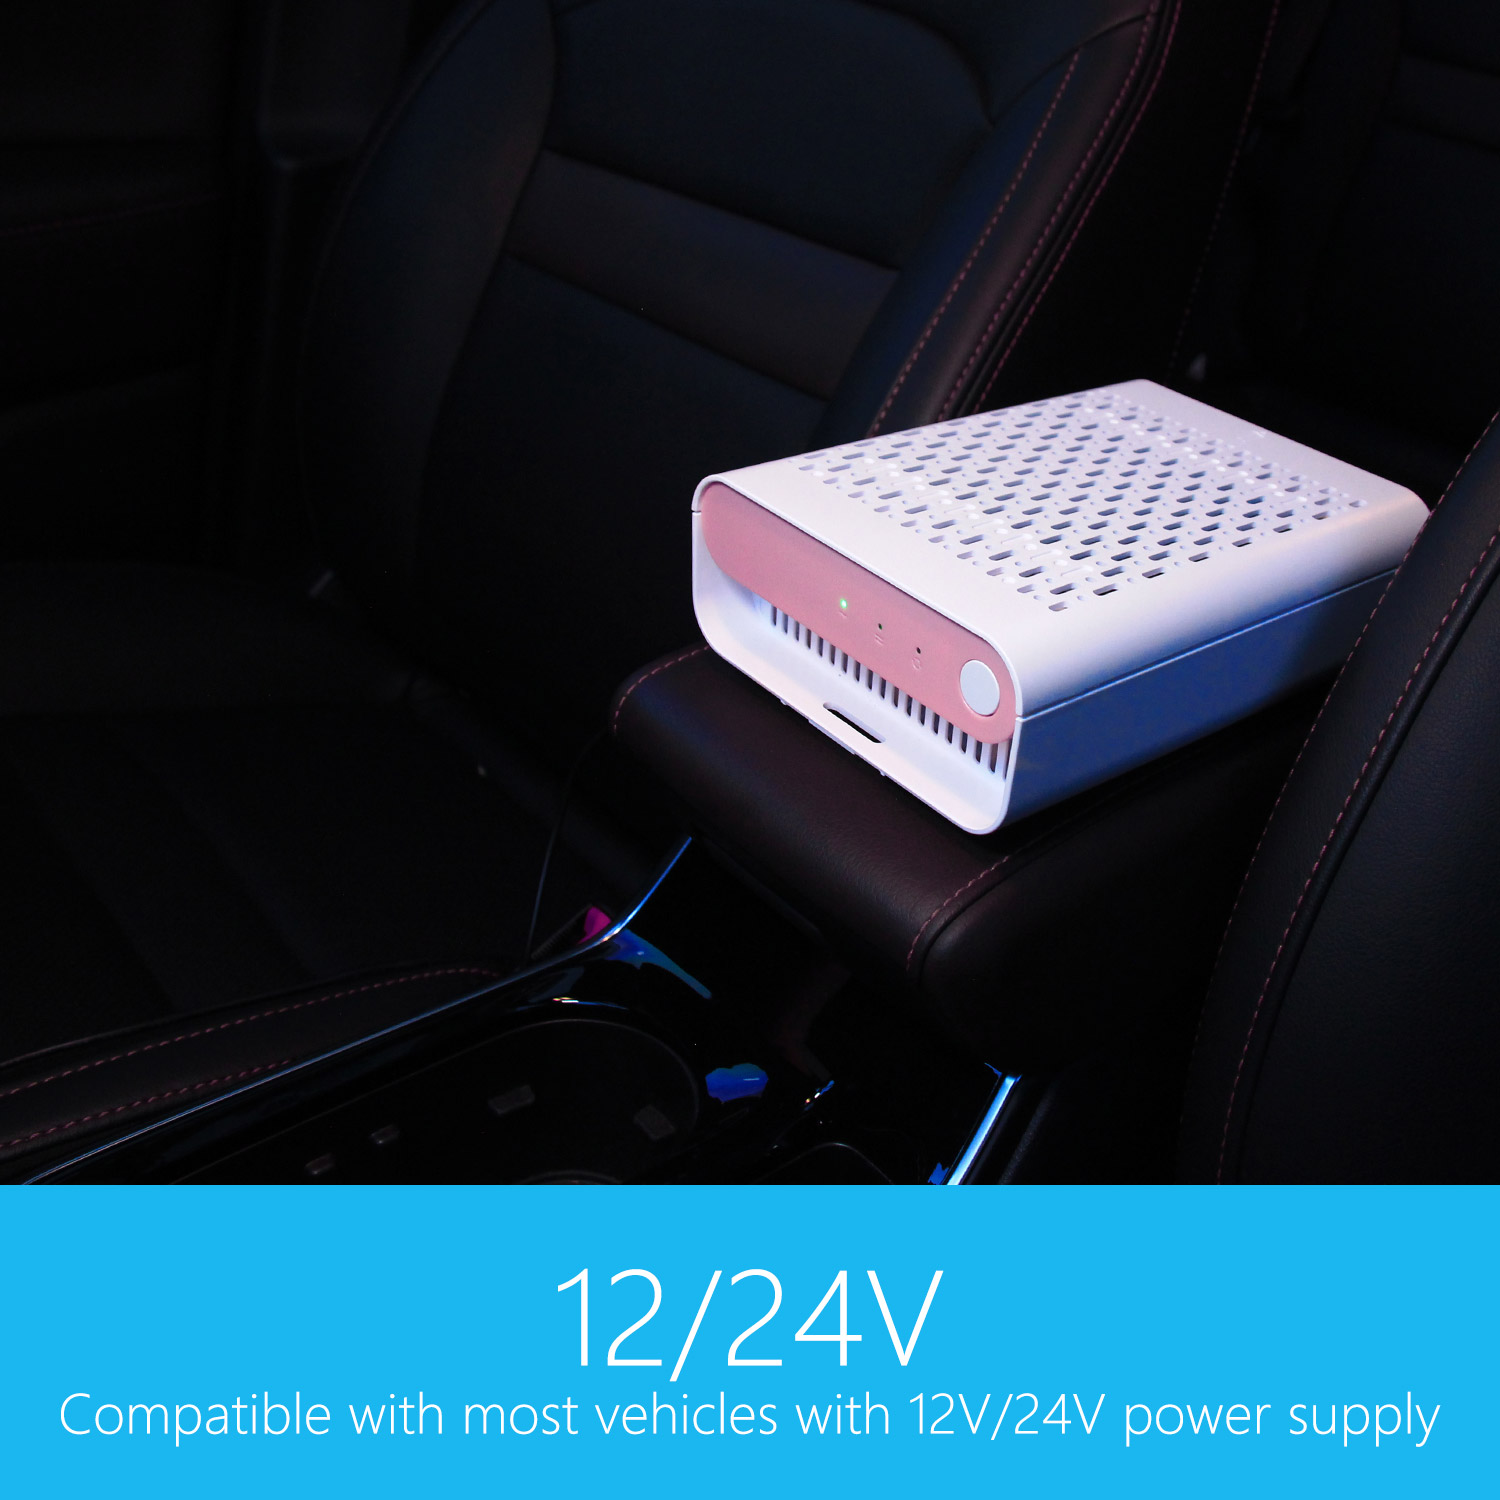 Car Air Purifier HEPA Filter put on flat surface in car